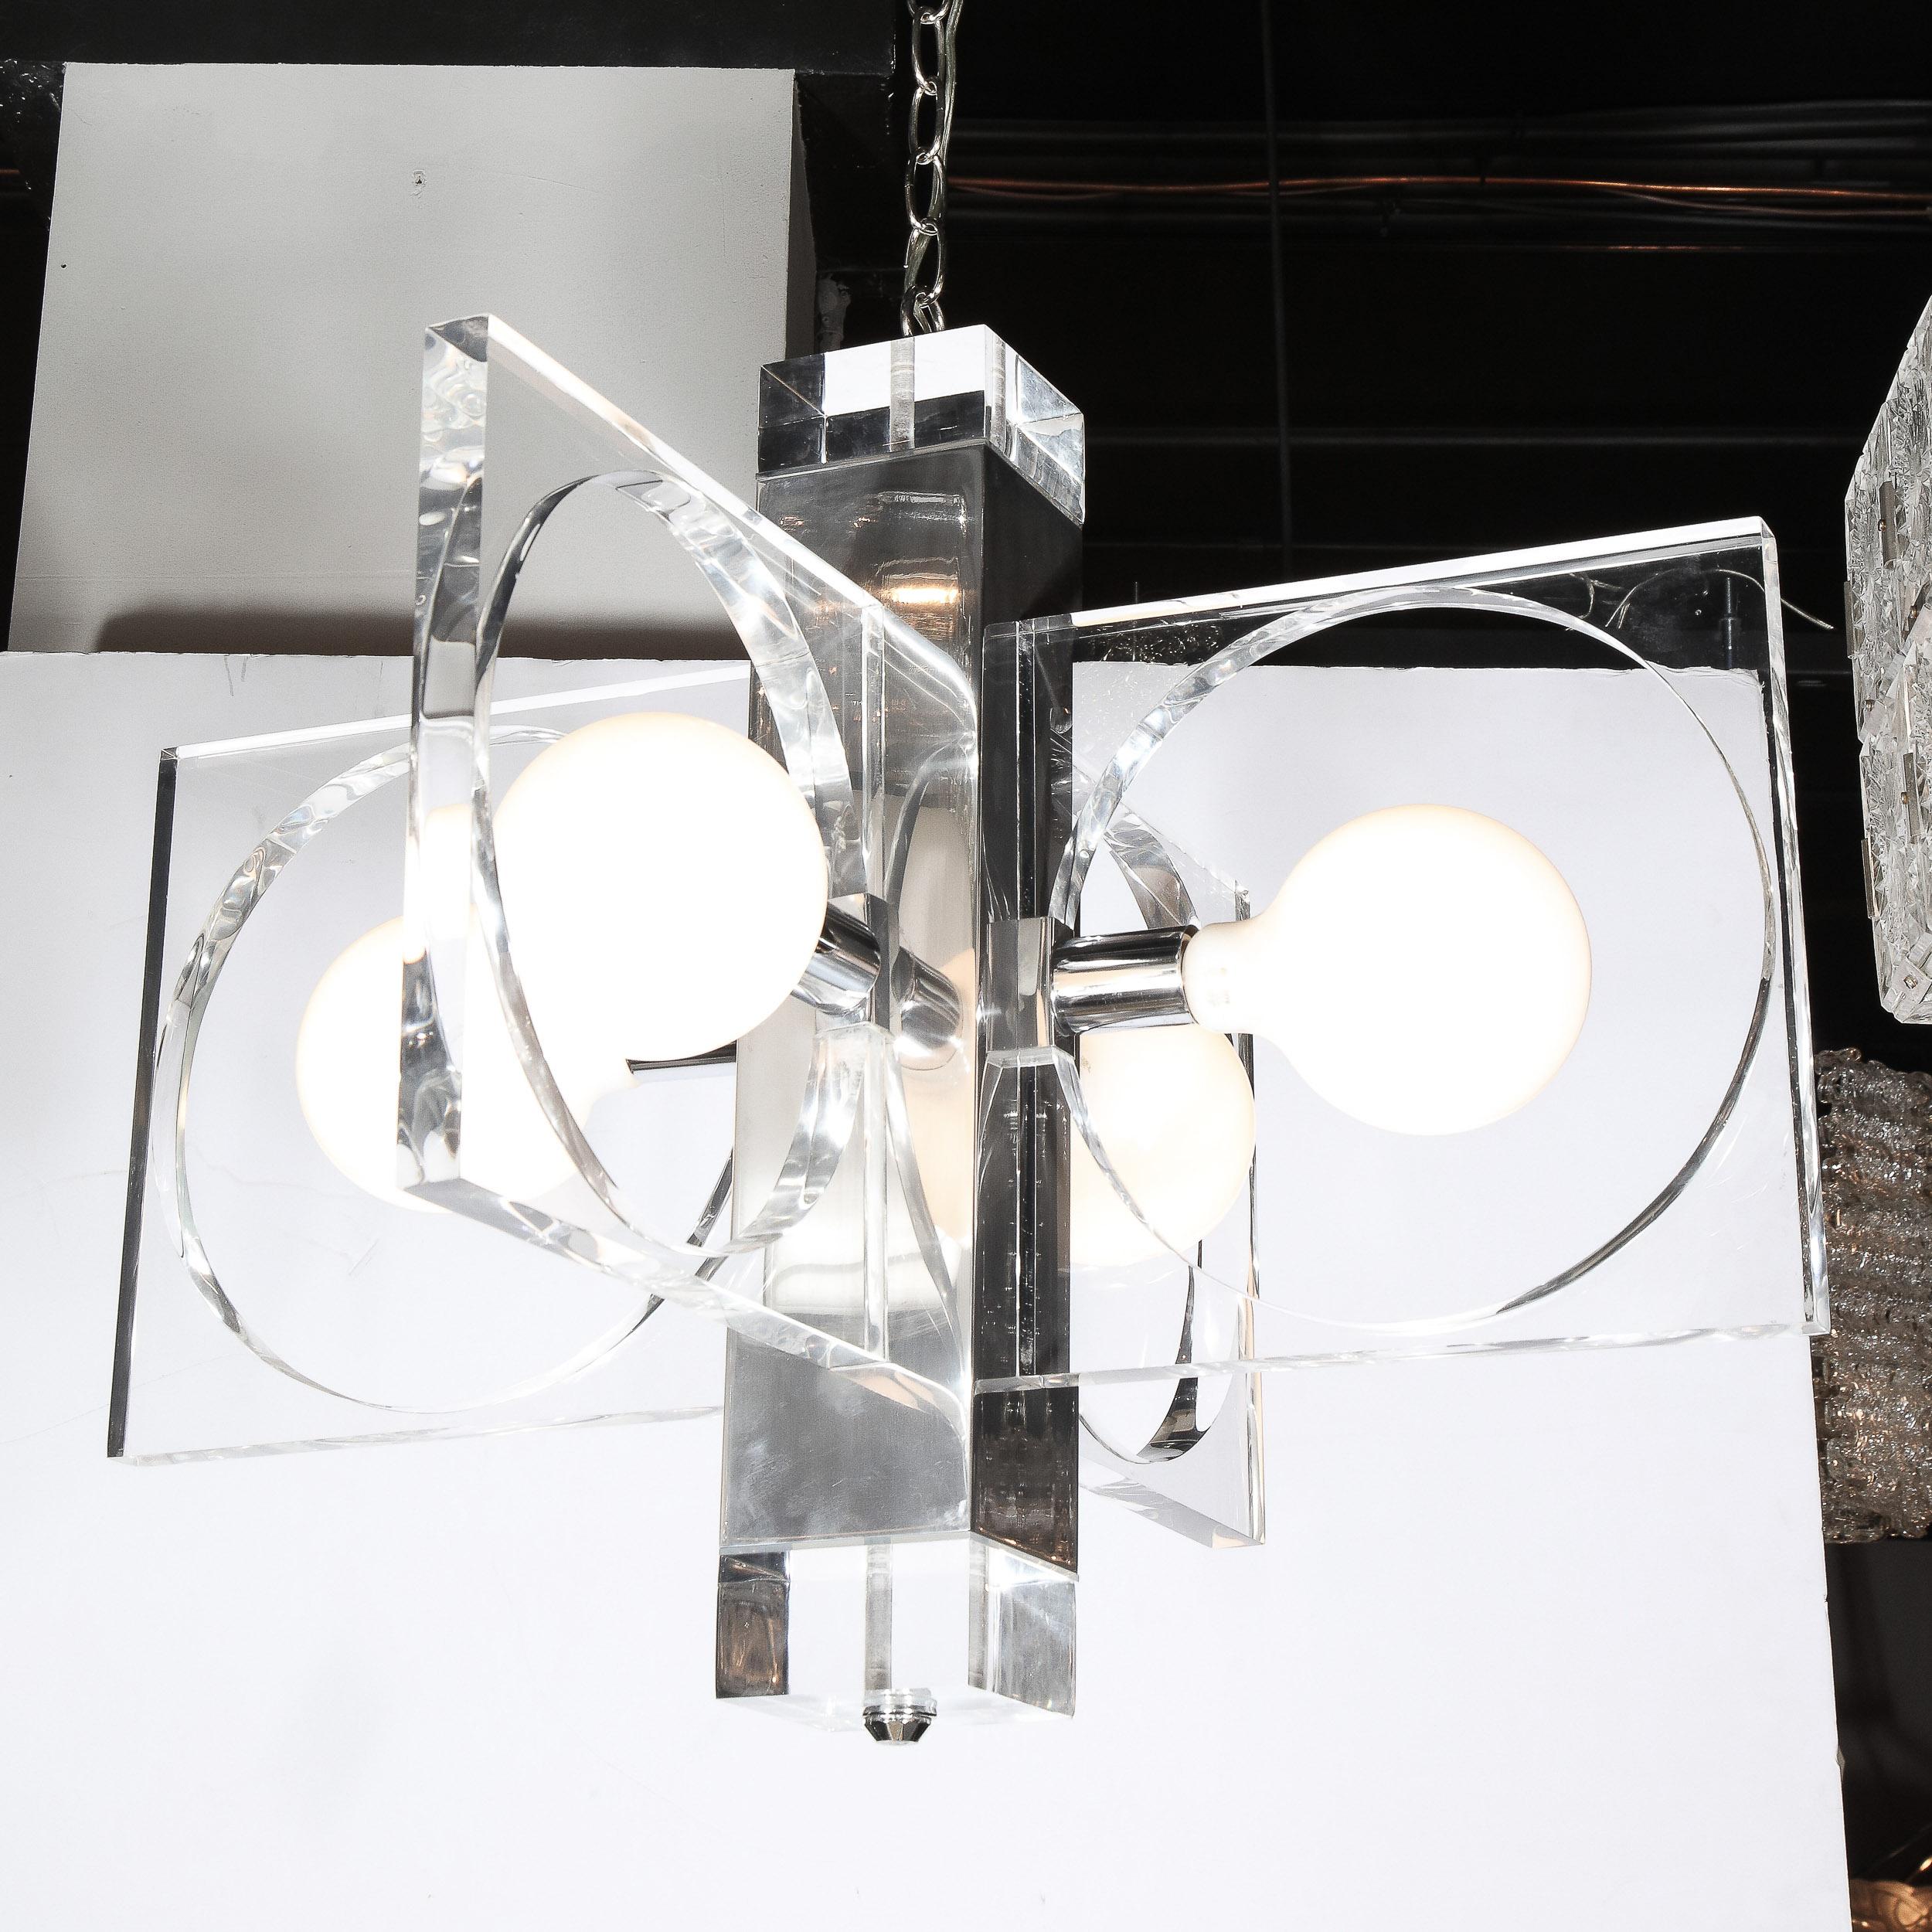 This sophisticated Mid-Century Modern chandelier was realized in Italy, circa 1970. It features a rectangular body in lustrous polished chrome capped on each end by solid volumetric square blocks of translucent lucite. The bottom block is capped at